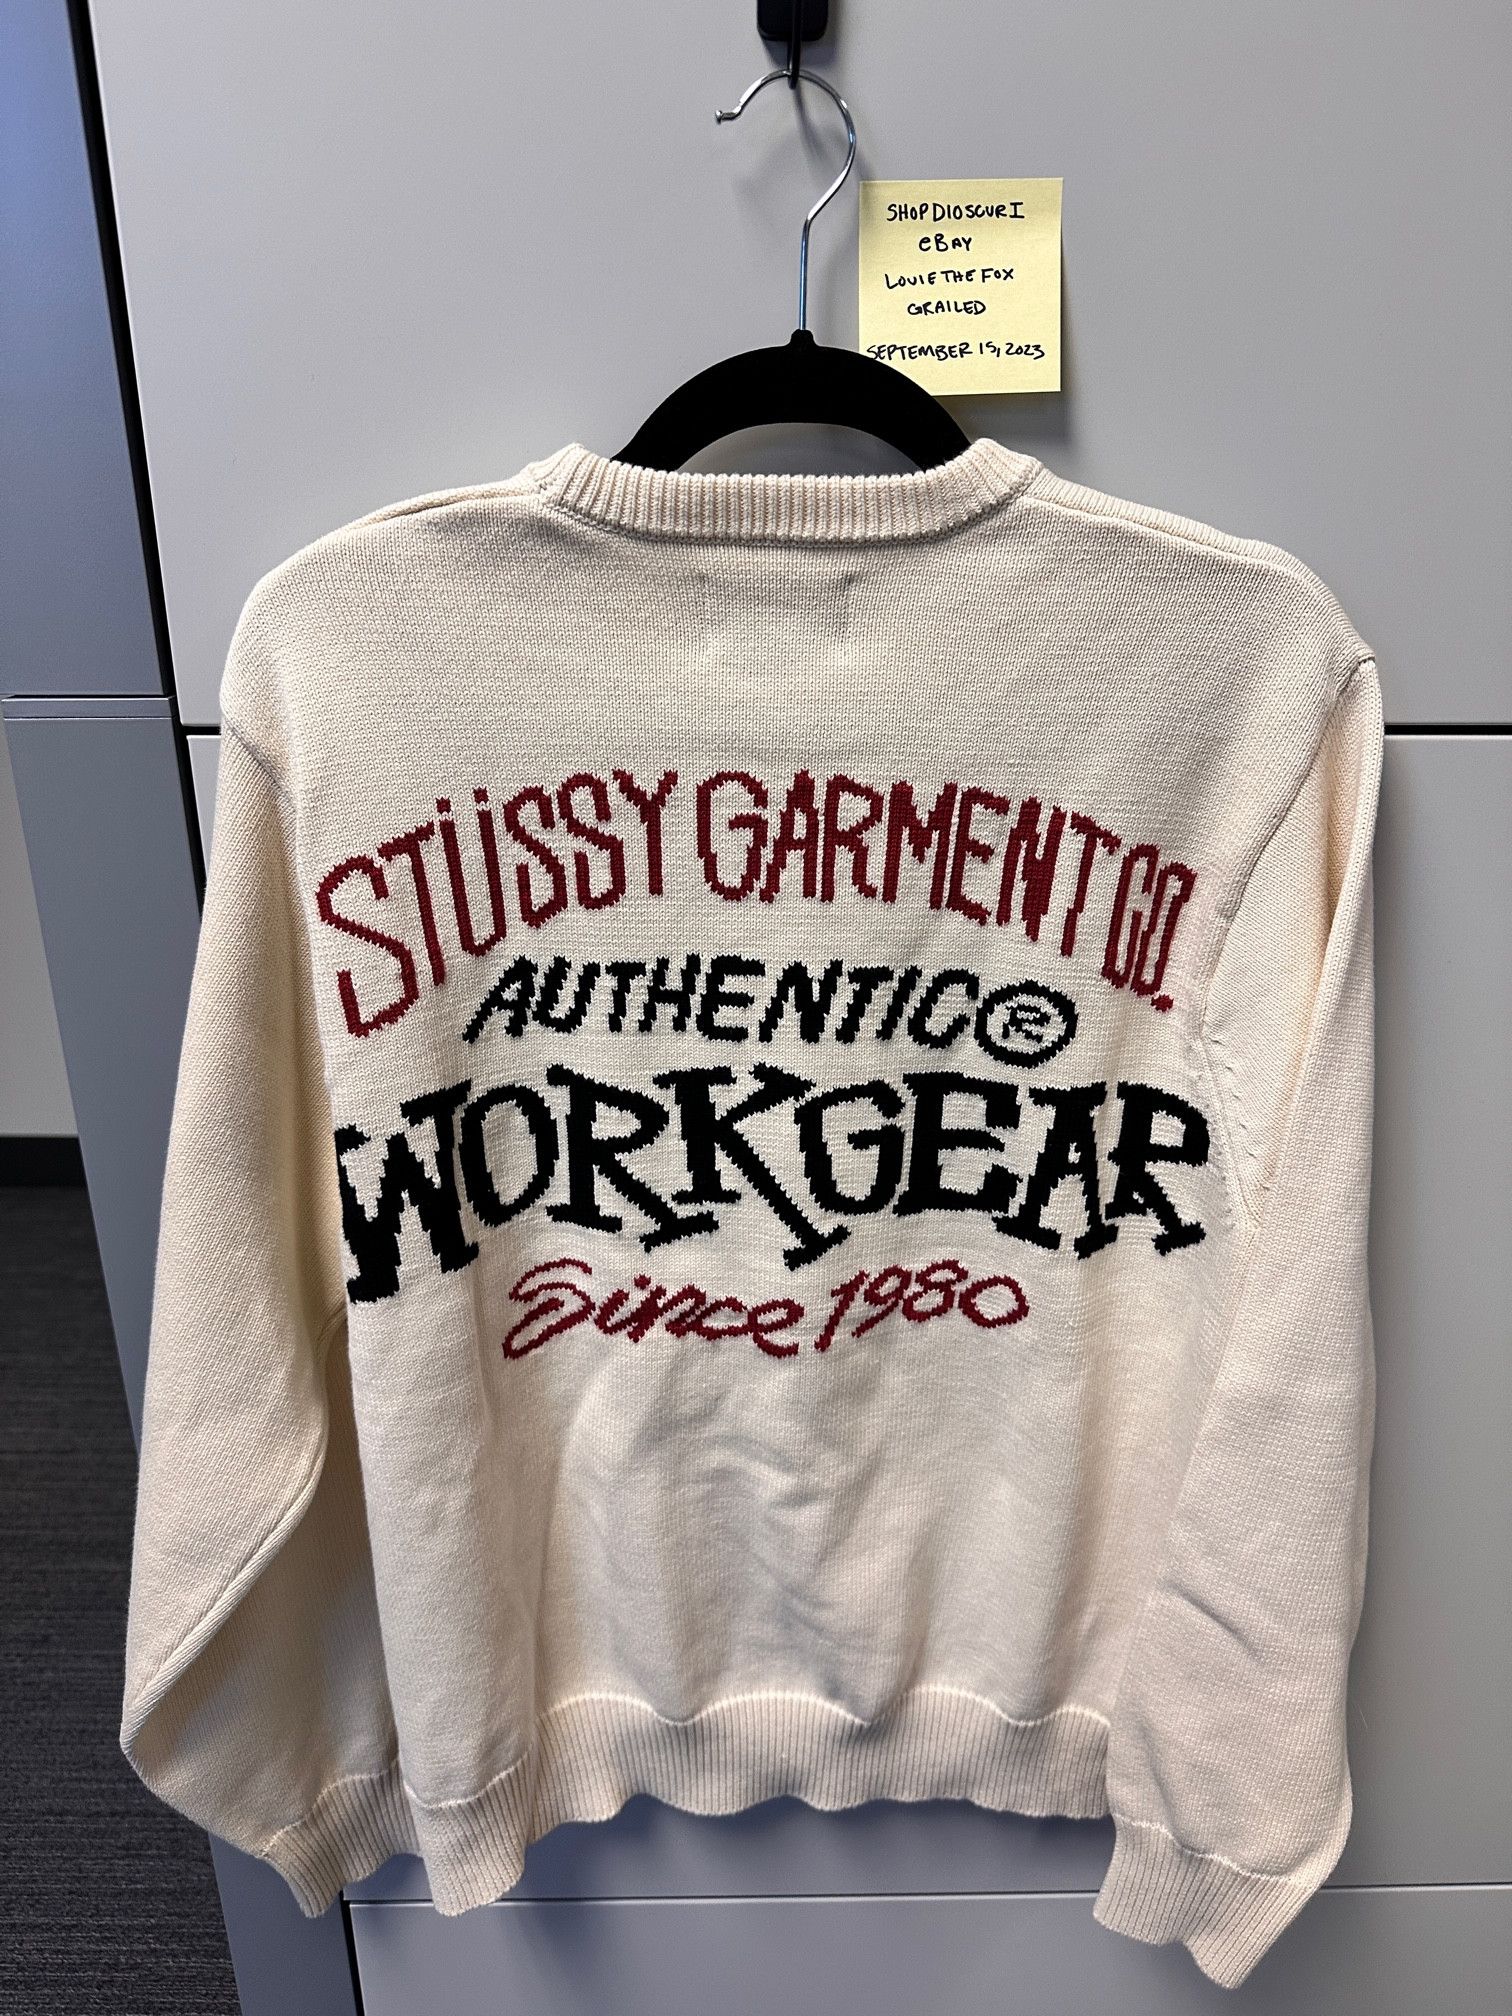 Stussy Stussy Authentic Workgear Sweater Size Medium | Grailed